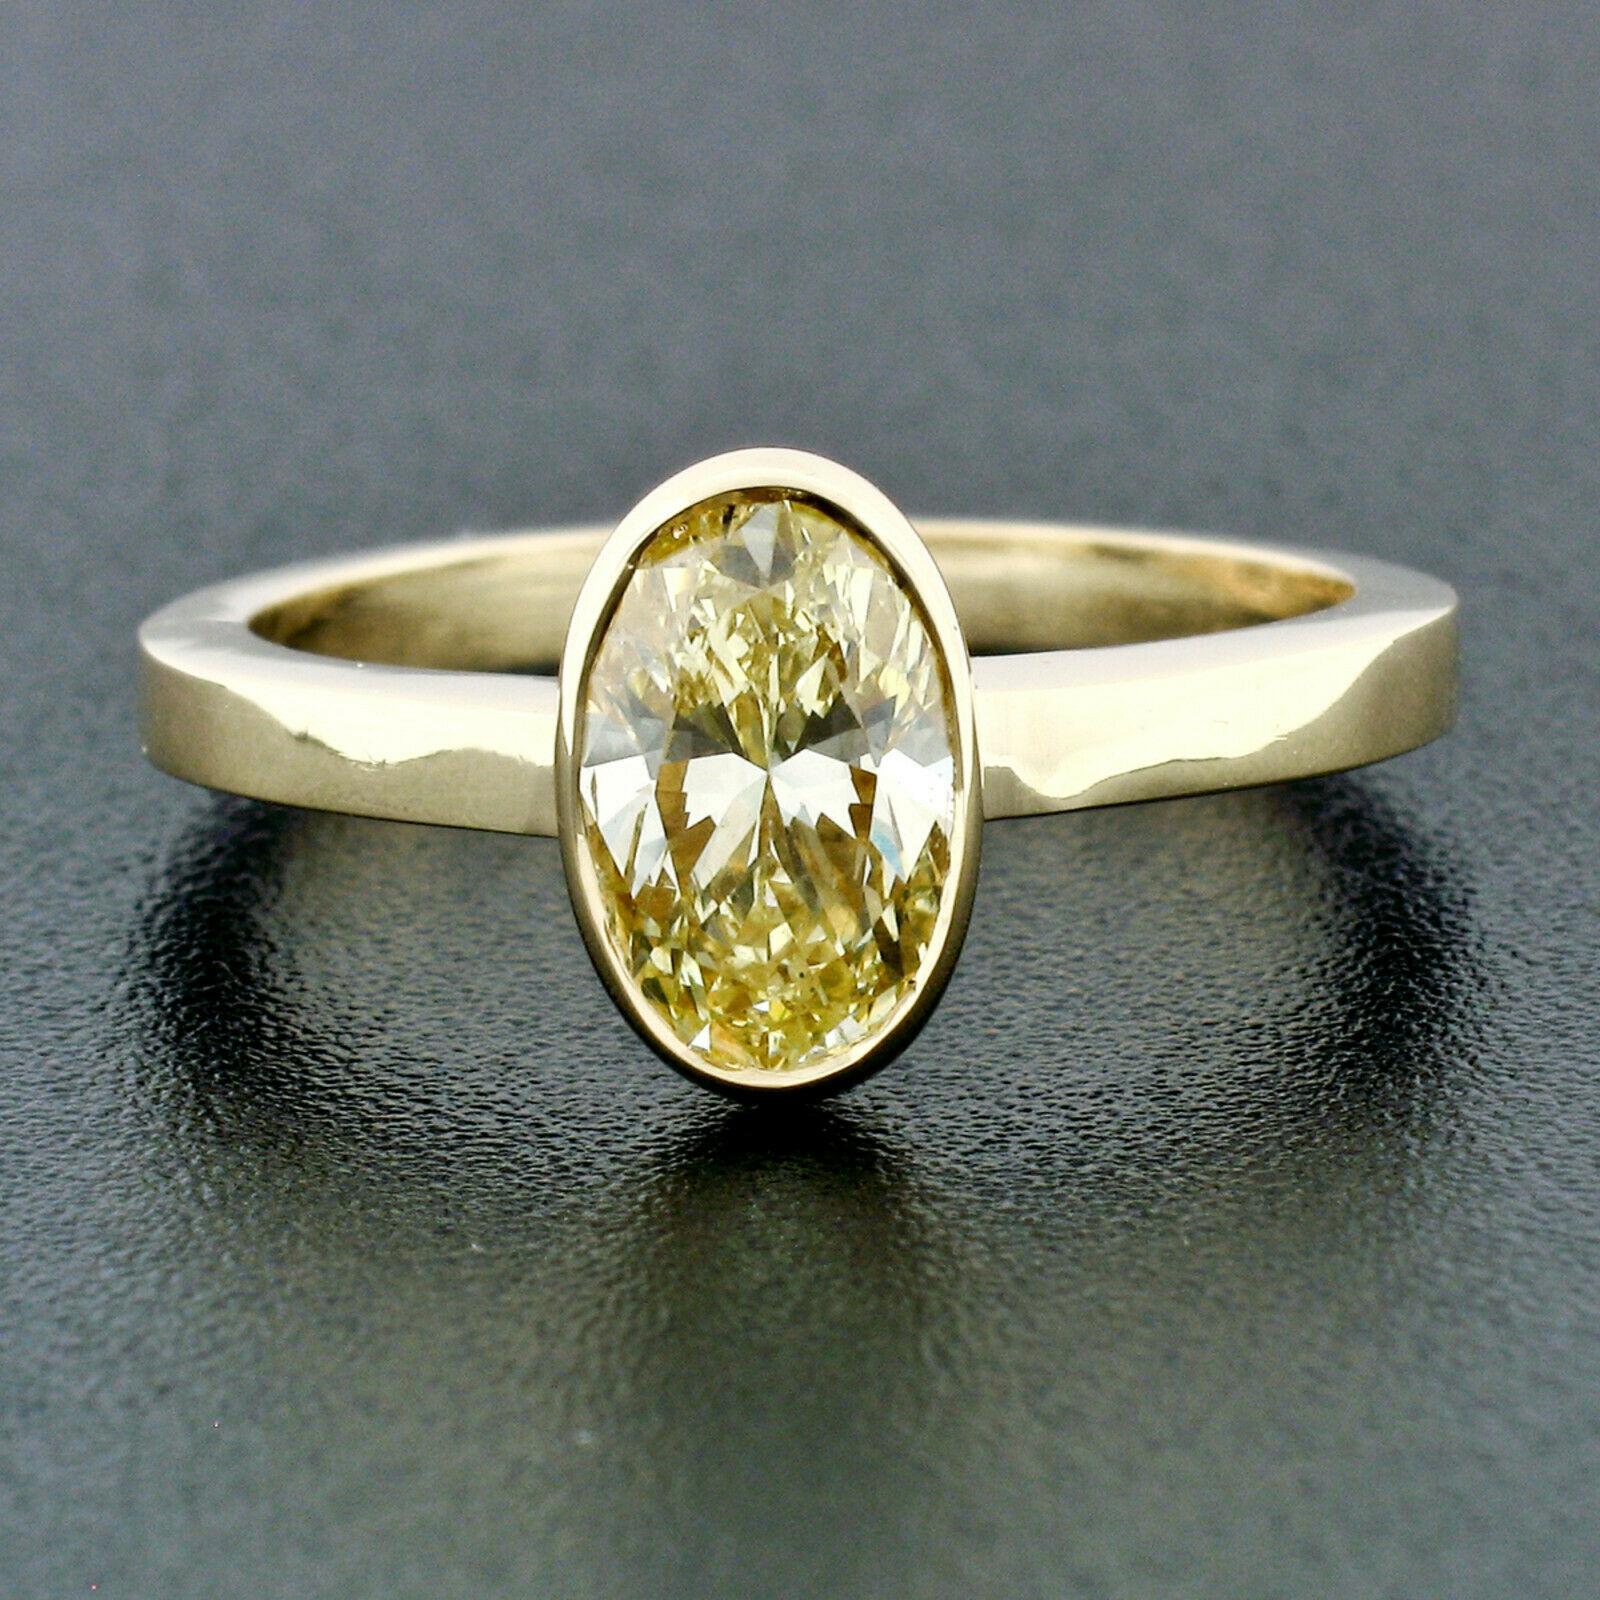 Here we have a simple, yet absolutely gorgeous, colored diamond engagement ring newly crafted from solid 18k yellow gold. The diamond is GIA certified and is a natural, even, fancy yellow color. The solitaire is bezel set at the center of the ring,